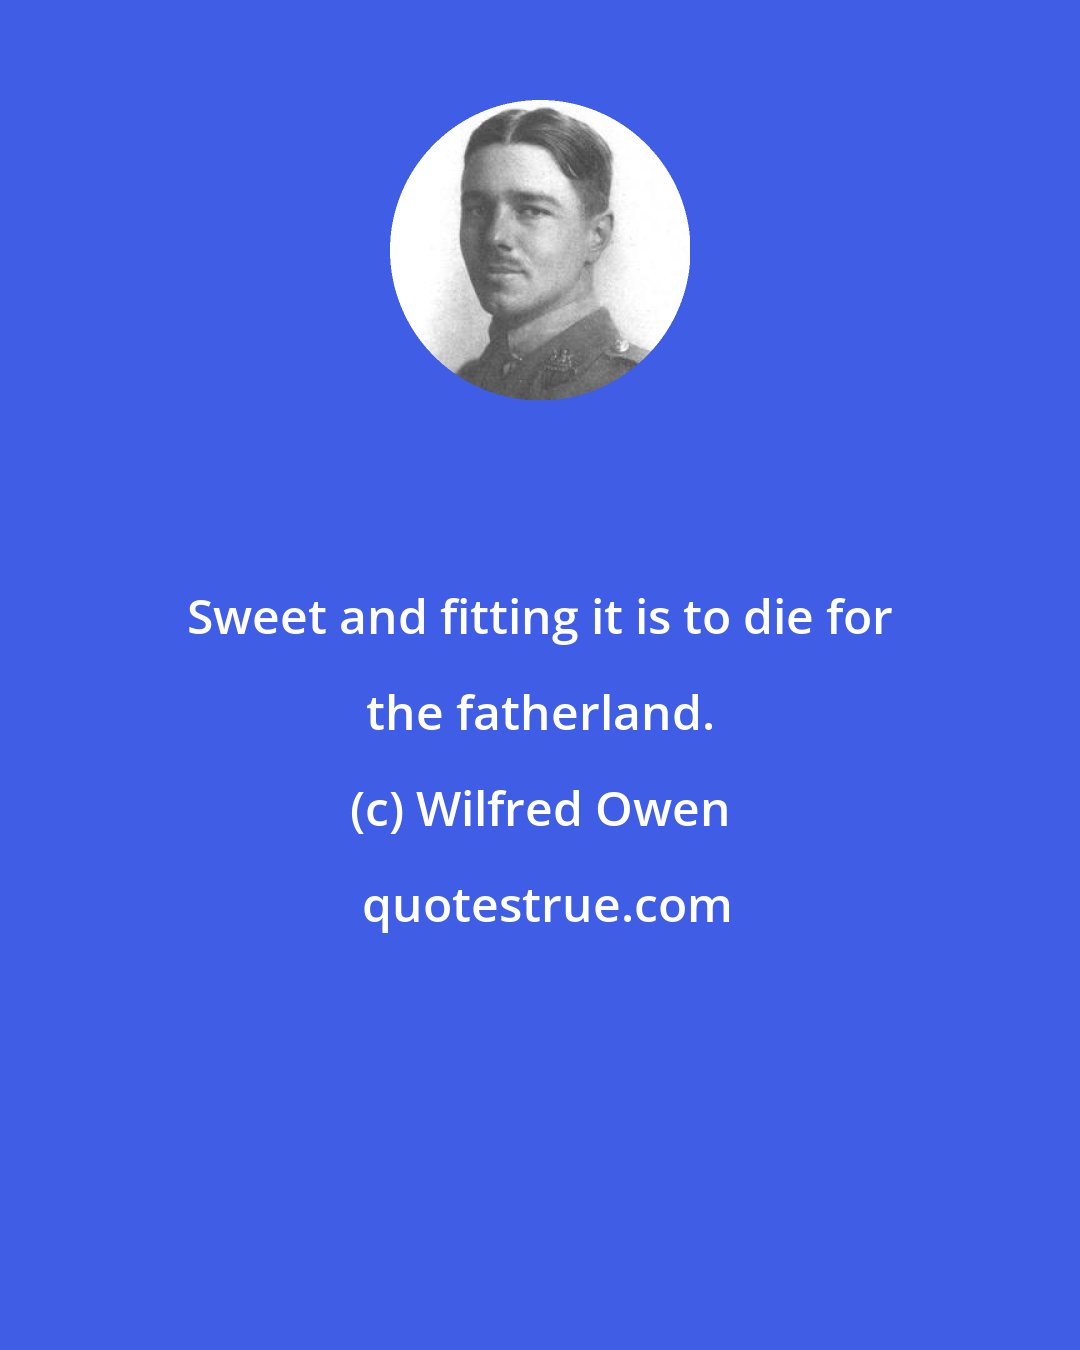 Wilfred Owen: Sweet and fitting it is to die for the fatherland.